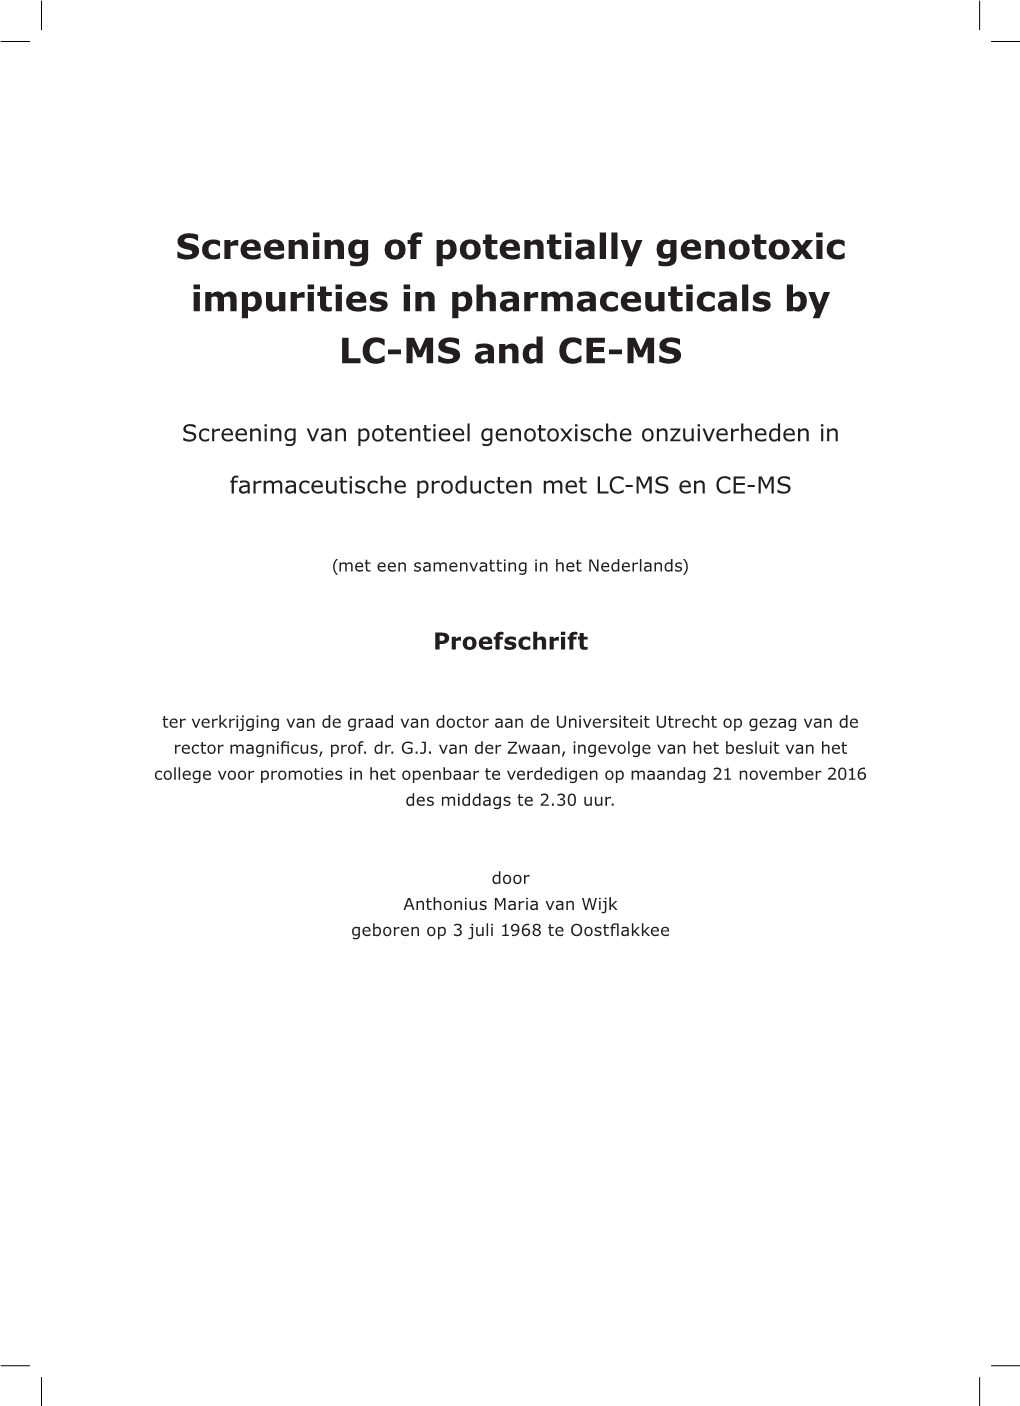 Screening of Potentially Genotoxic Impurities in Pharmaceuticals by LC-MS and CE-MS